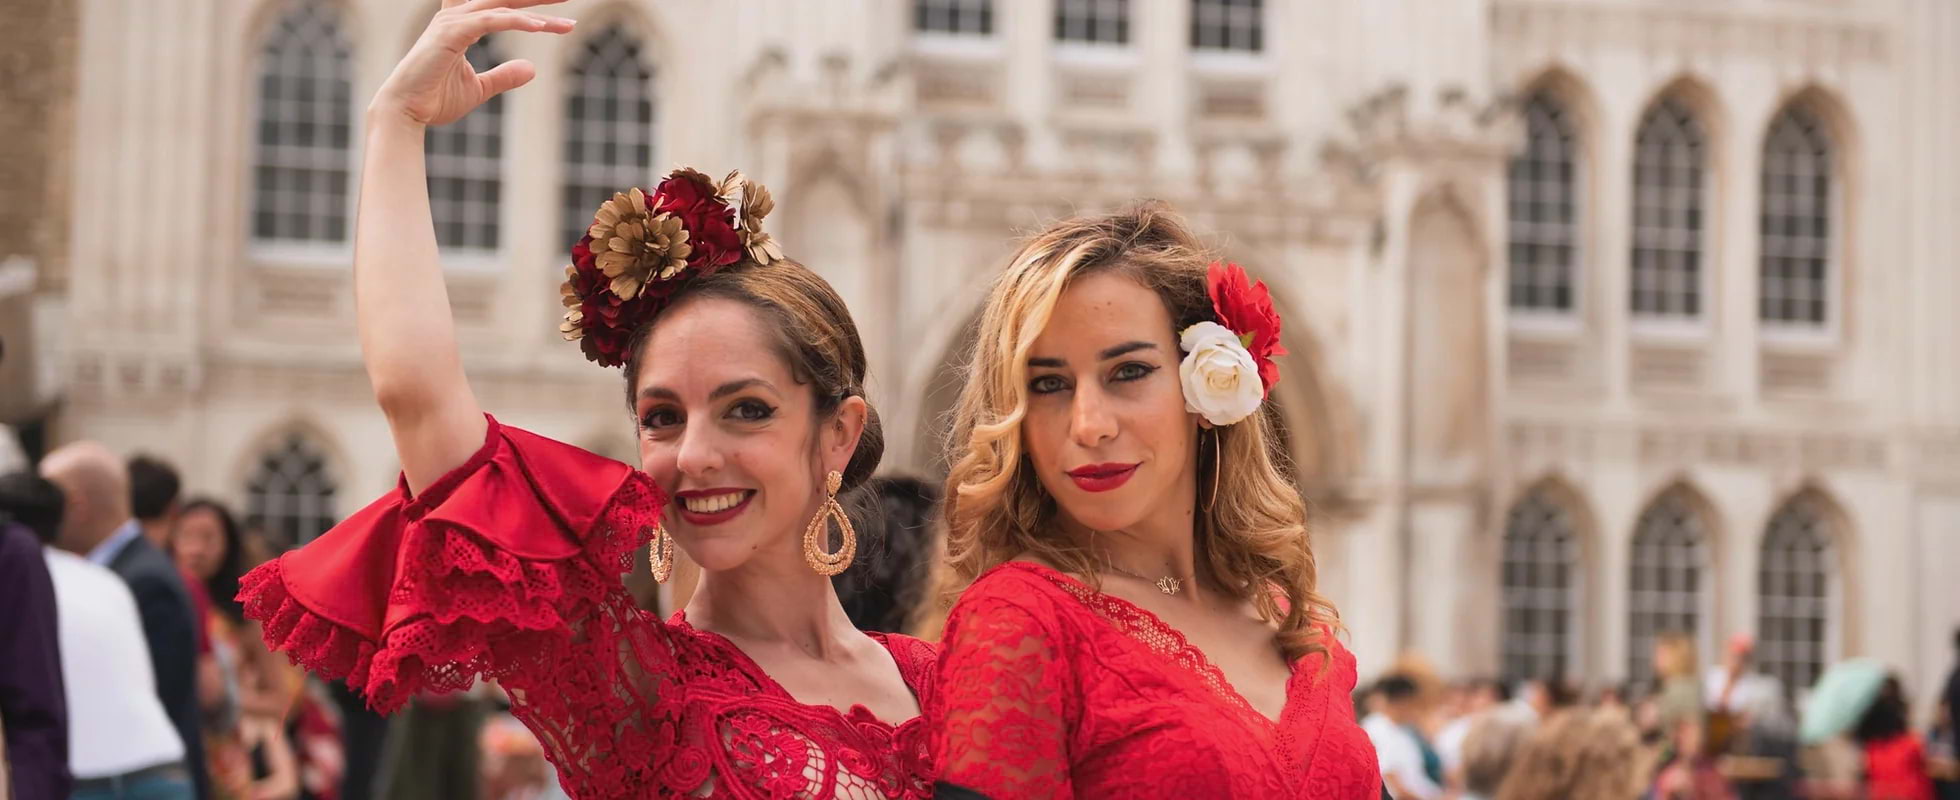 A free Spanish Festival is coming to London this summer